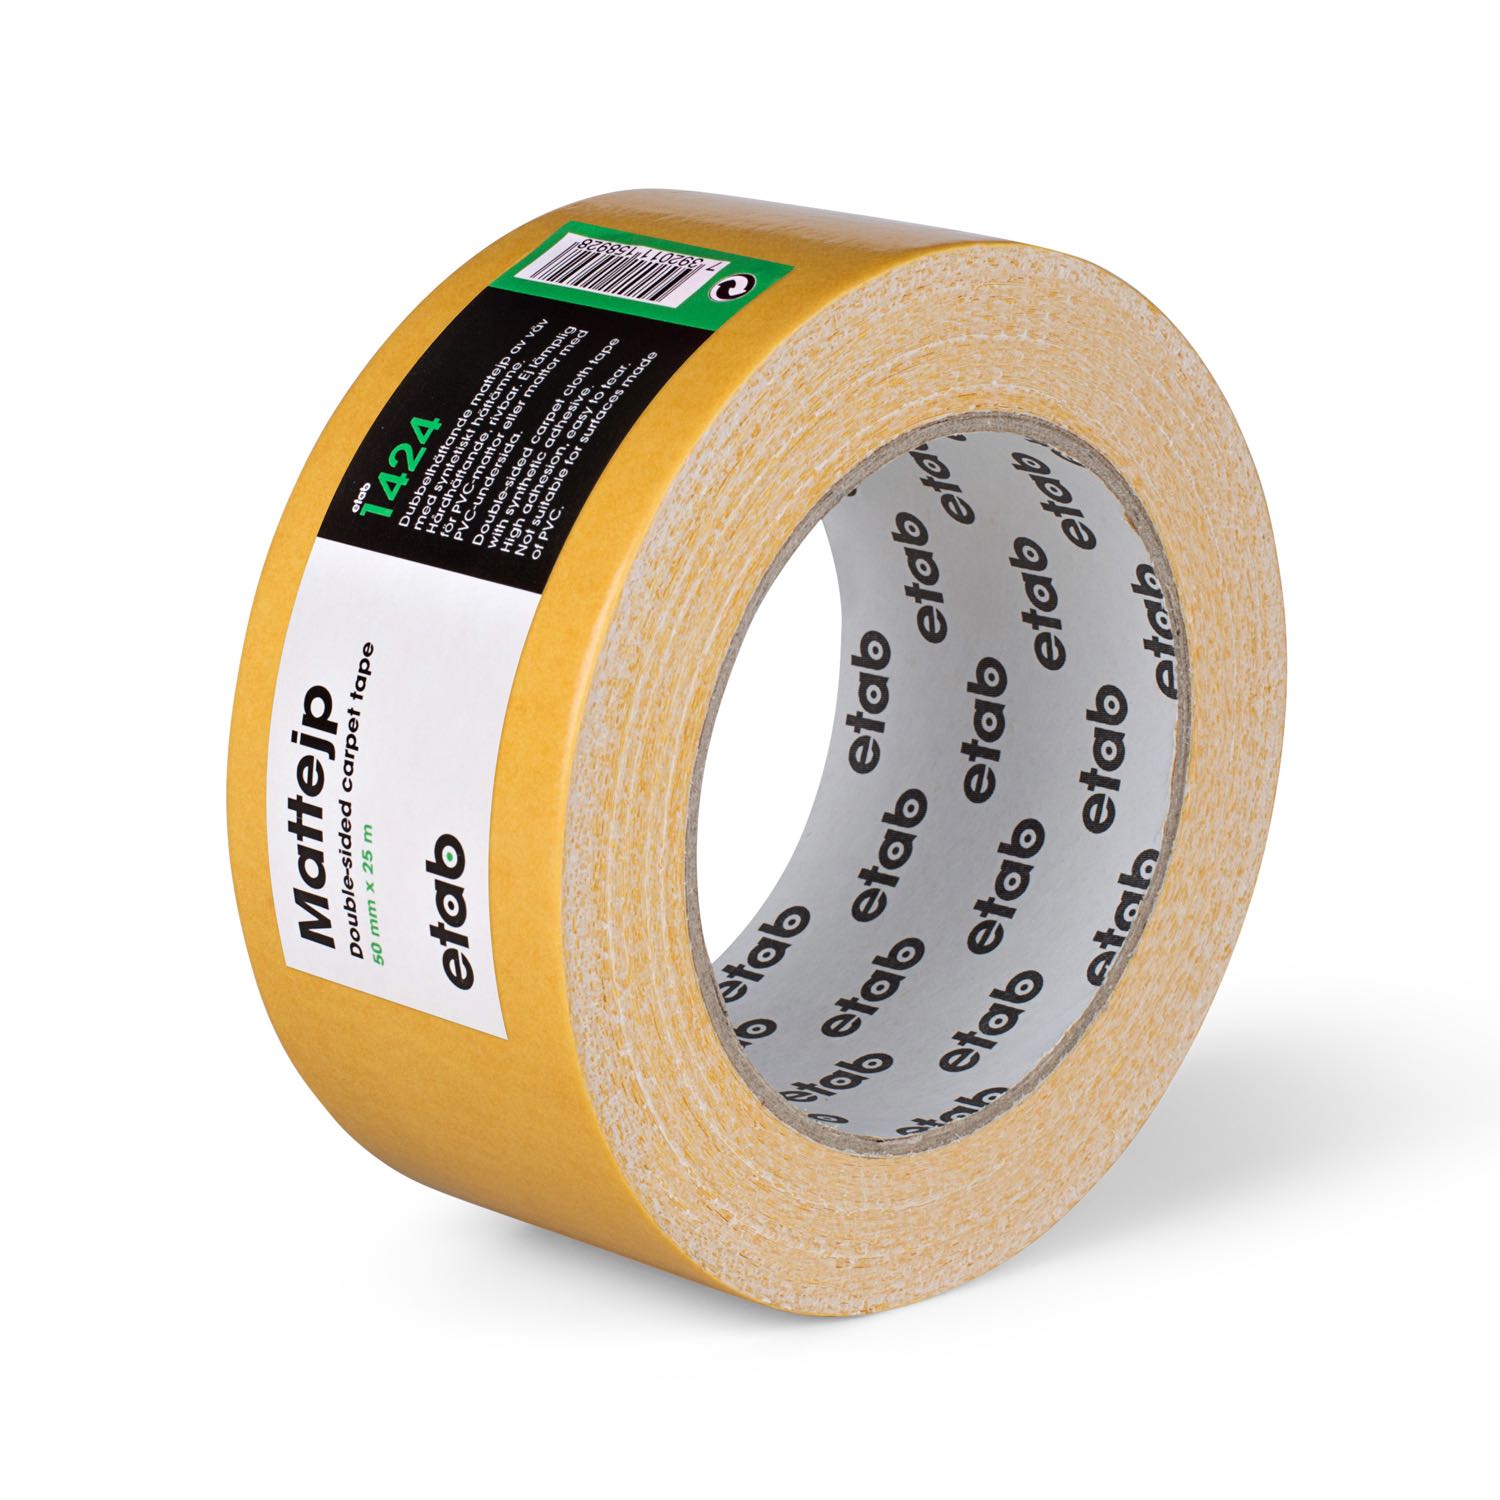 Etab 1424 Double Sided Carpet Tape, Double Sided Rug Tape